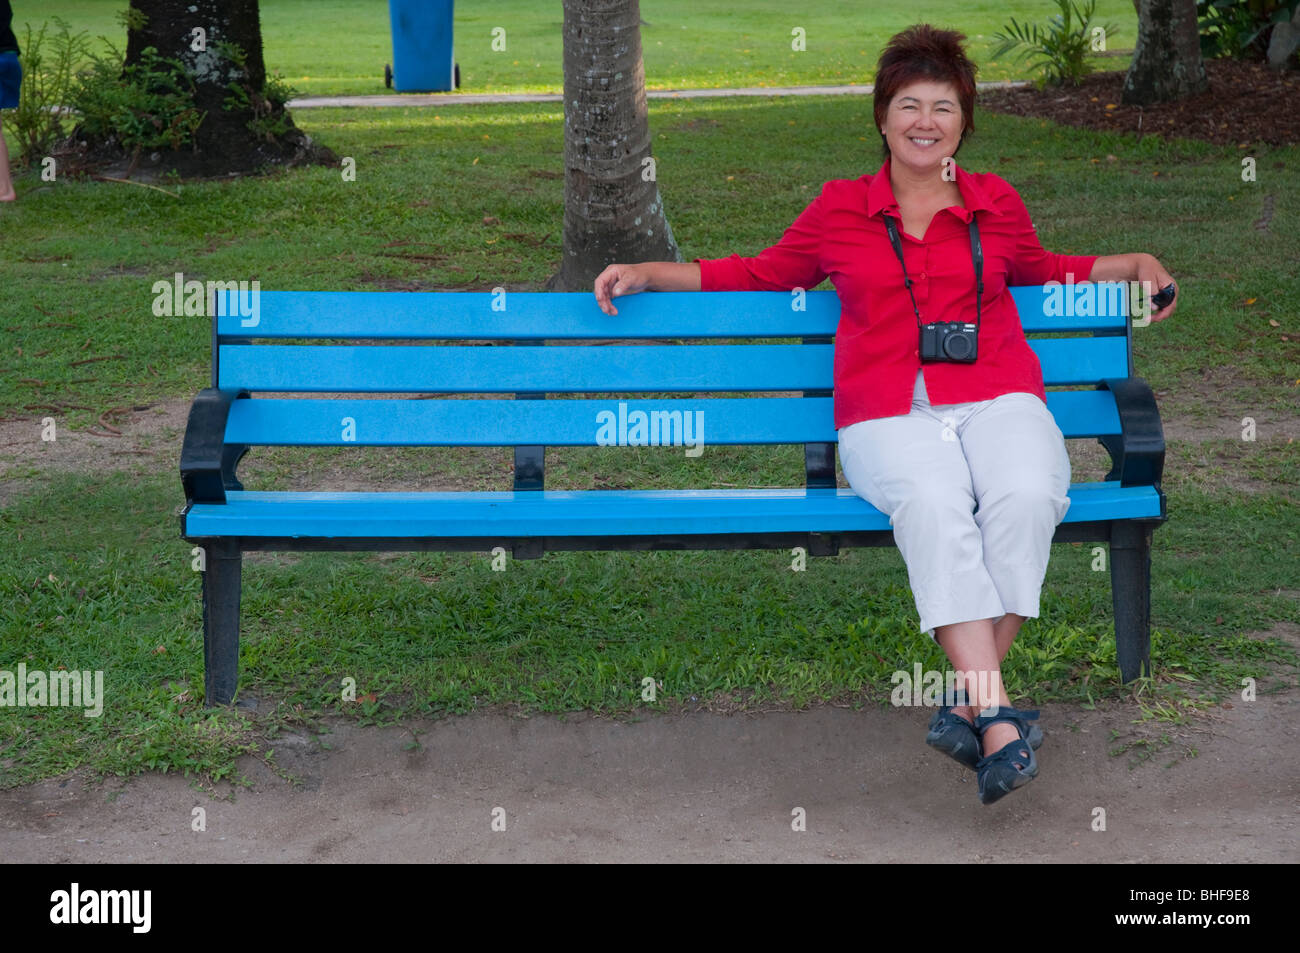 A mature woman in a red shirt sitting on a blue bench with a Canon Stock  Photo - Alamy